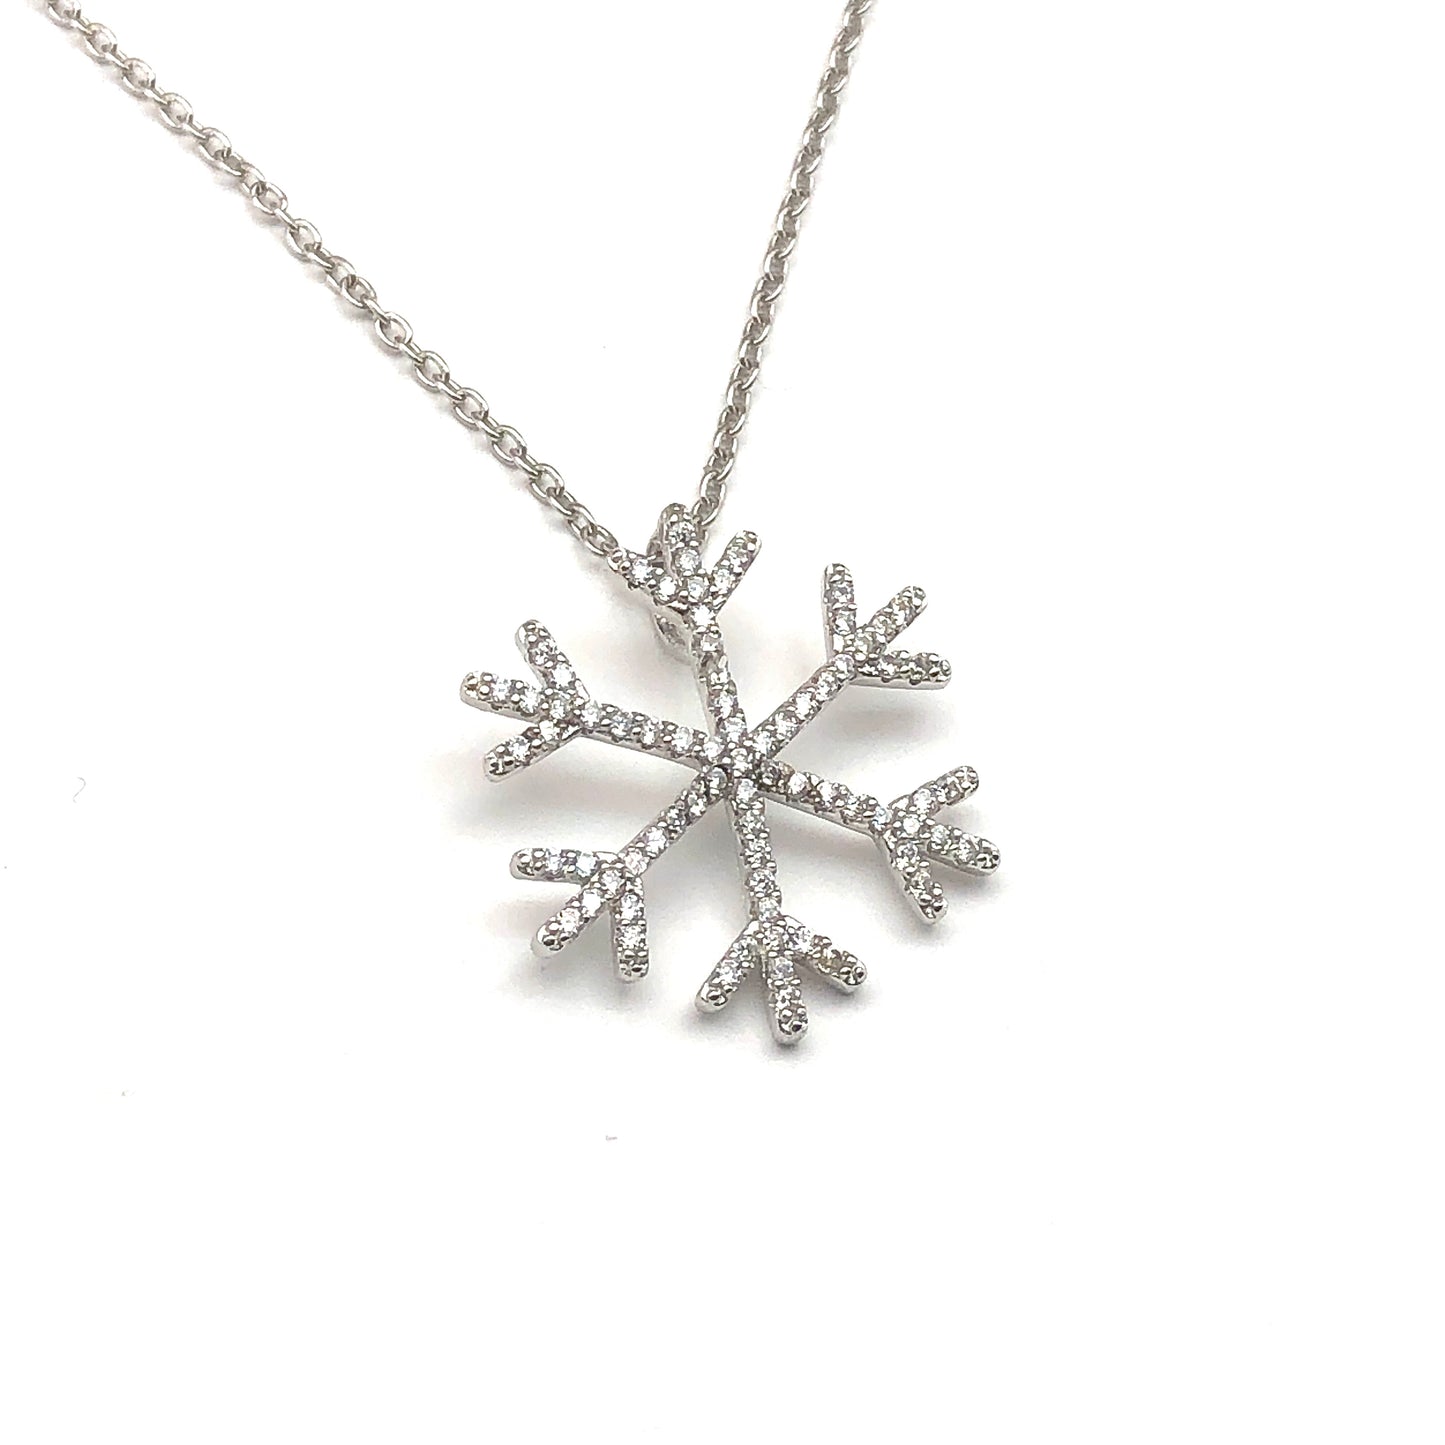 Silver Necklace | Charm Necklace | 925 Sterling Crystalized Snowflake Pendant Necklace